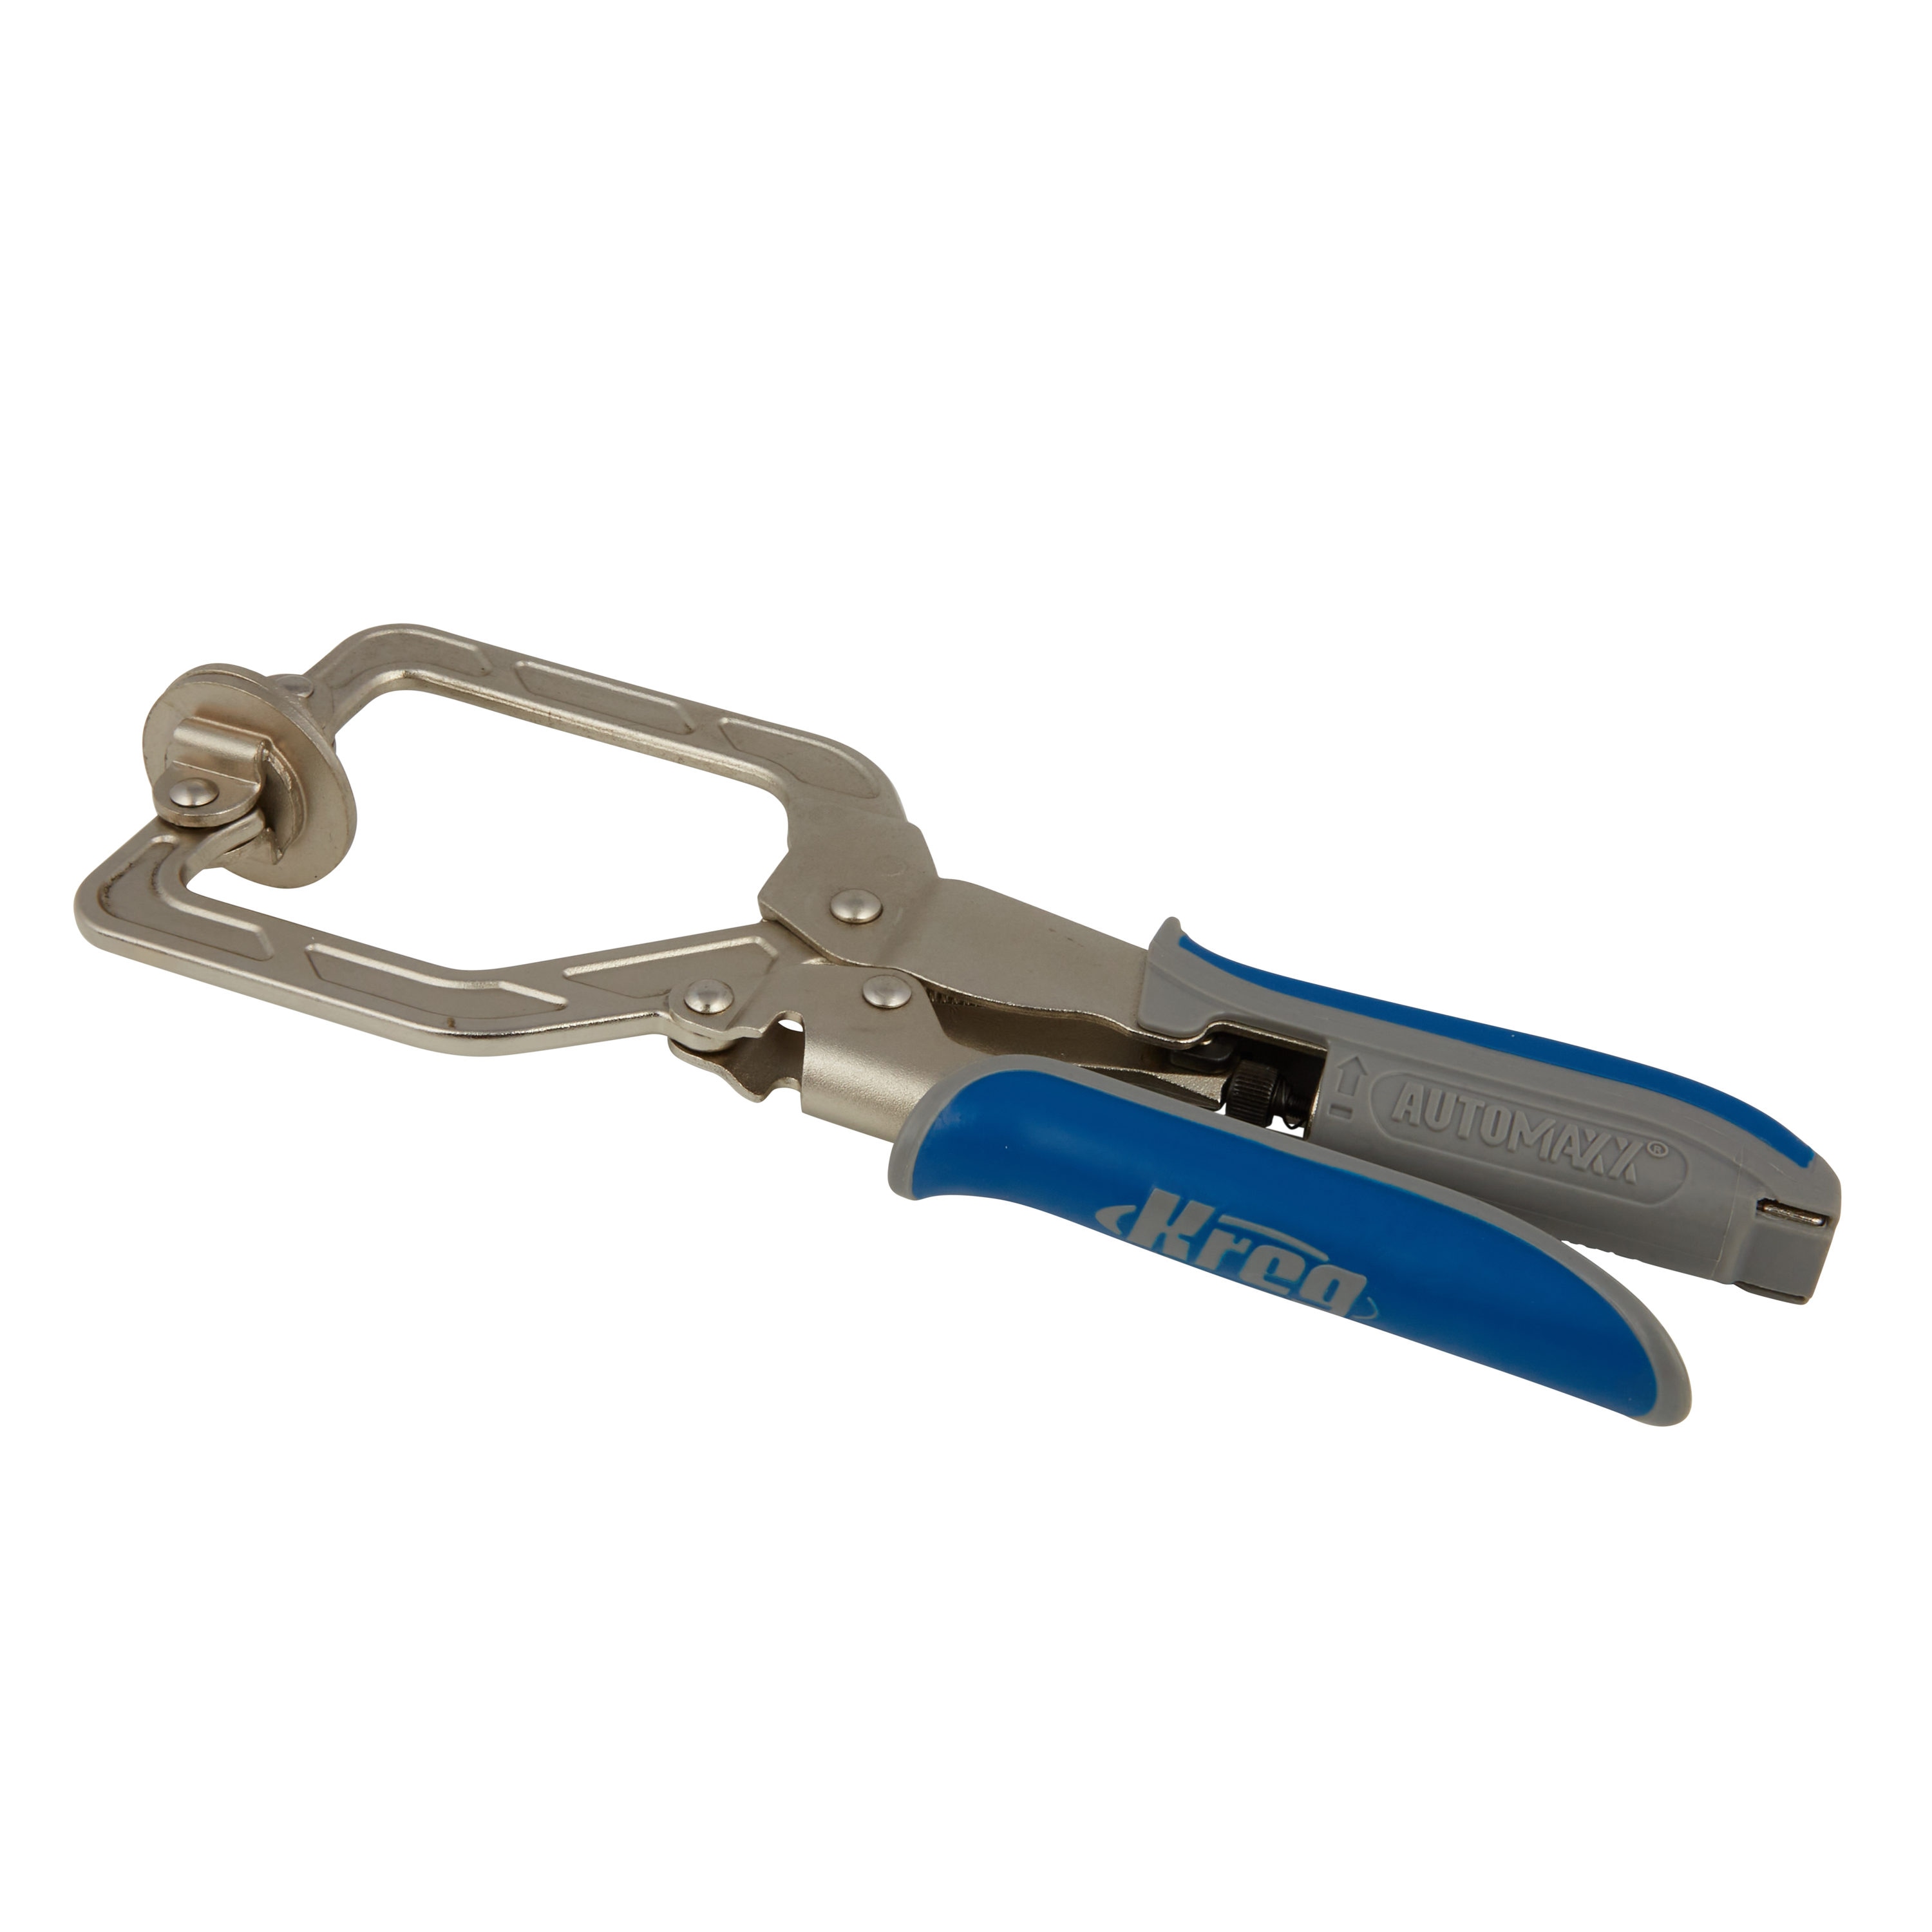 Kreg Tool KHC3 Wood Project Clamp With Automaxx 3" for sale online 